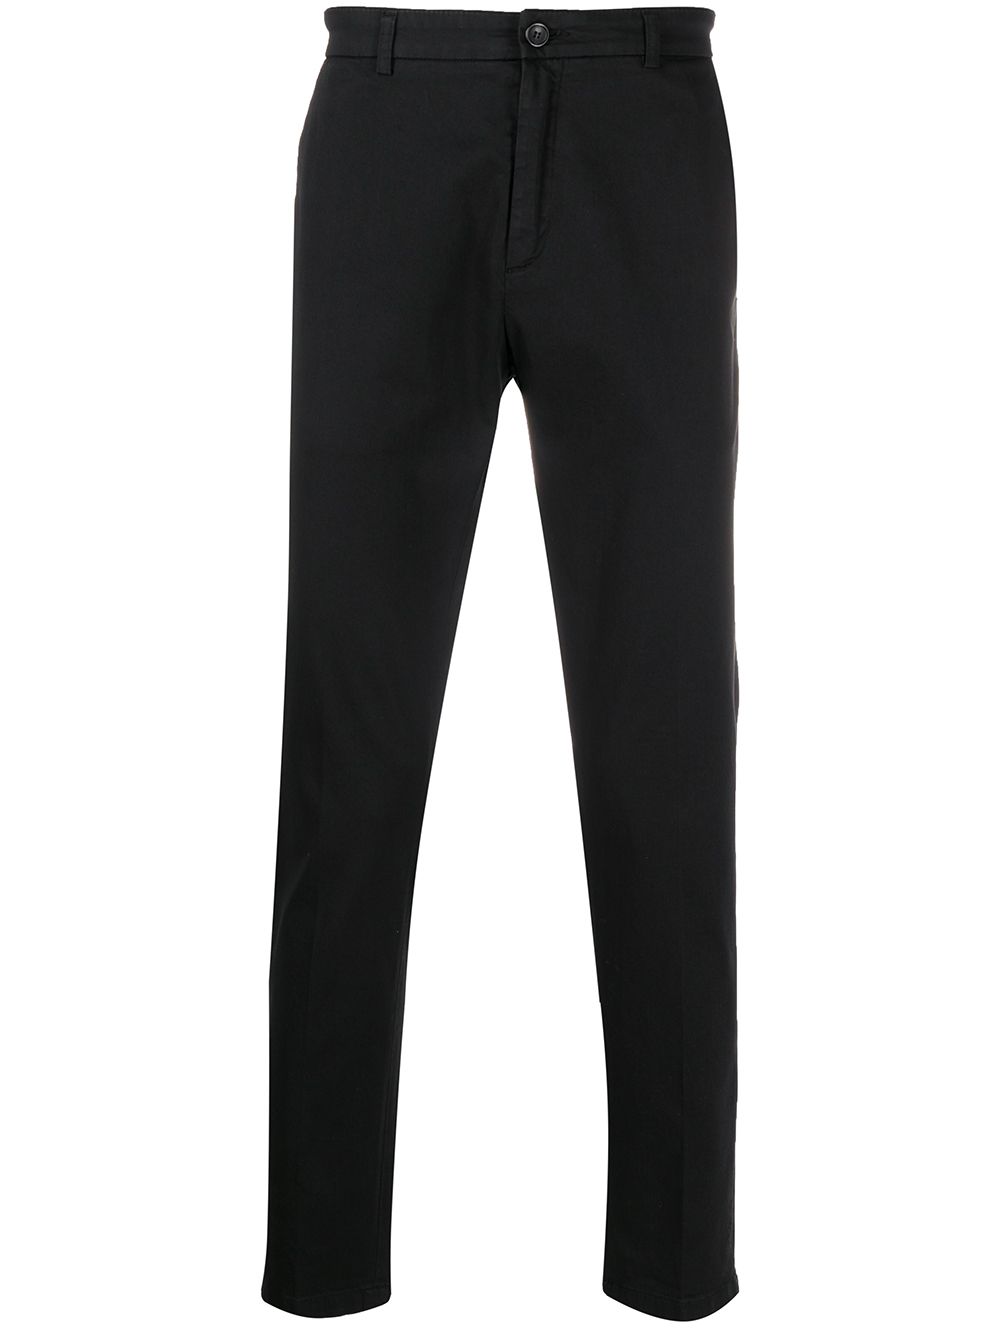 DEPARTMENT 5 SLIM-FIT CHINO TROUSERS